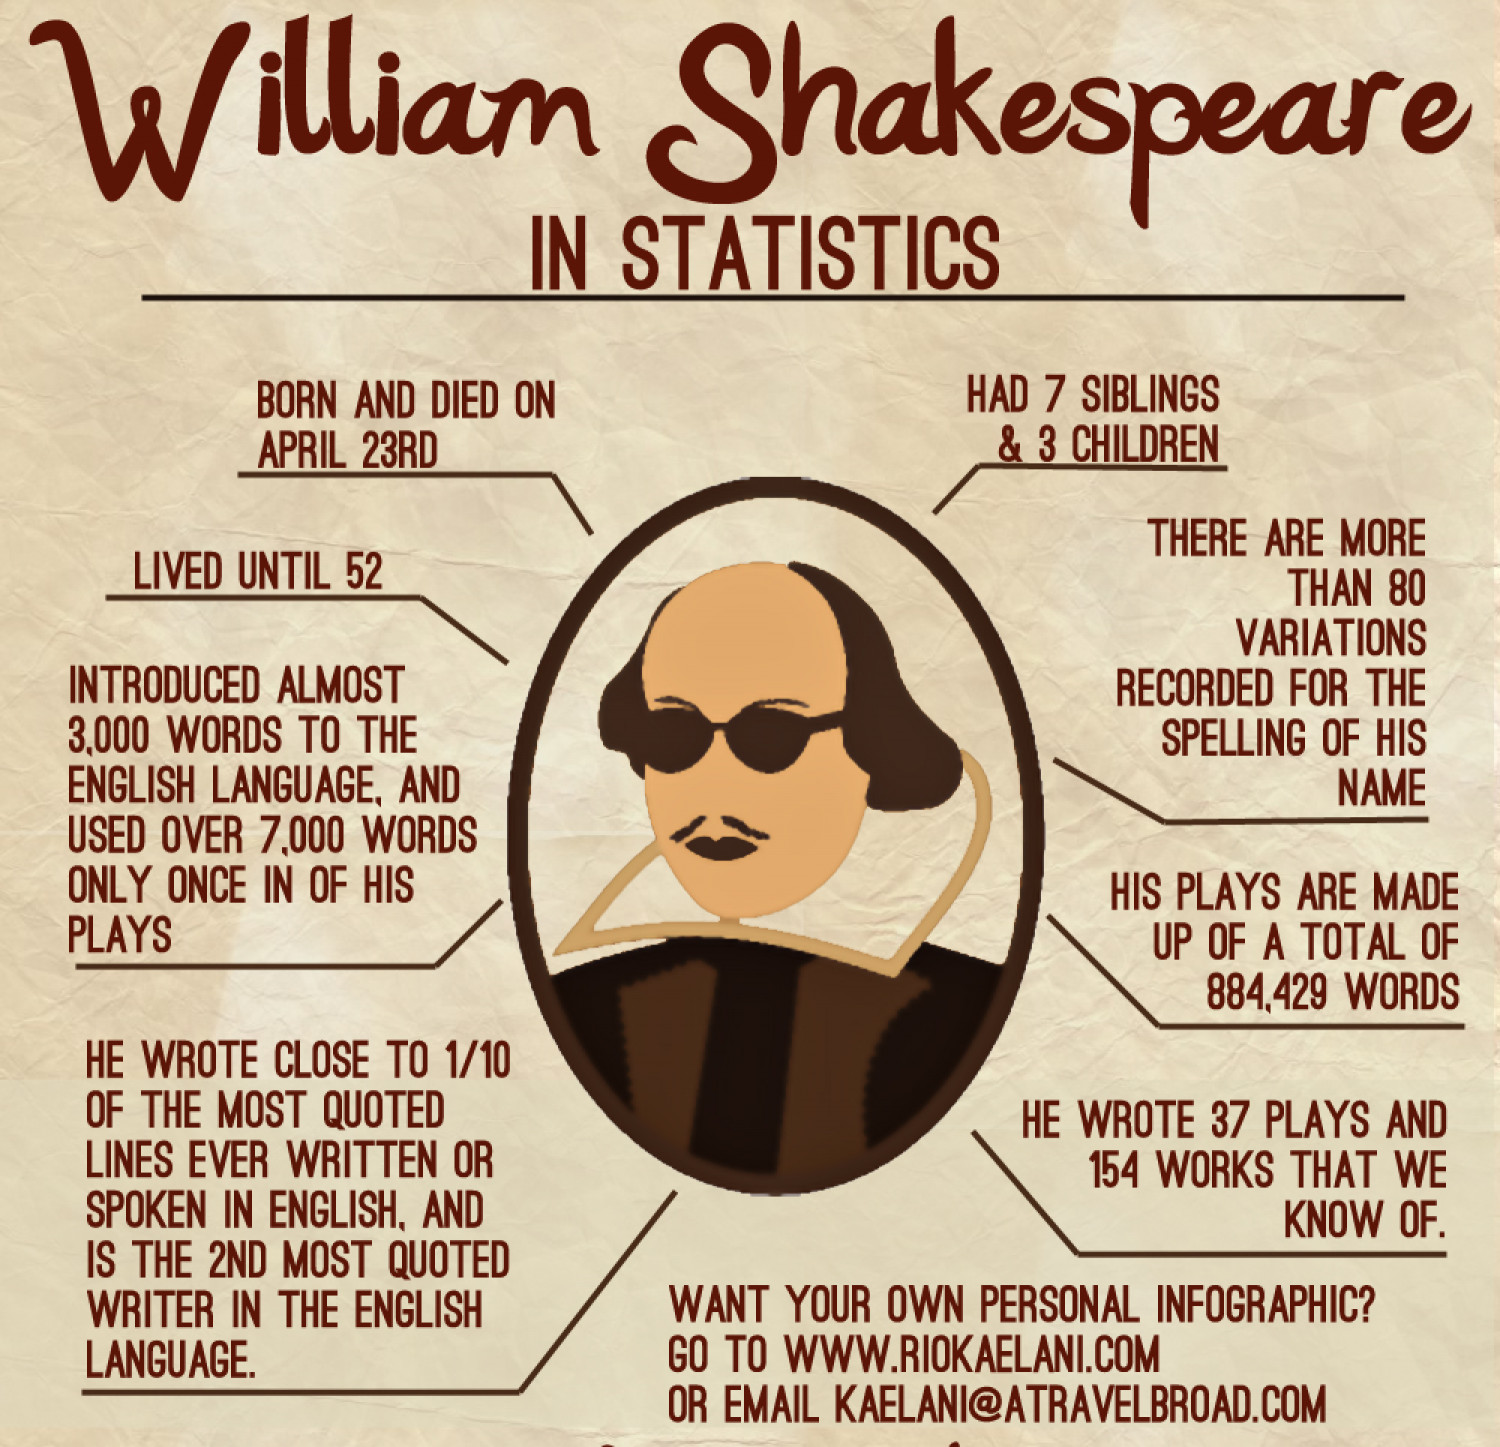 How-to-Create-an-Infographic-about-William-Shakespeare_9745.jpg